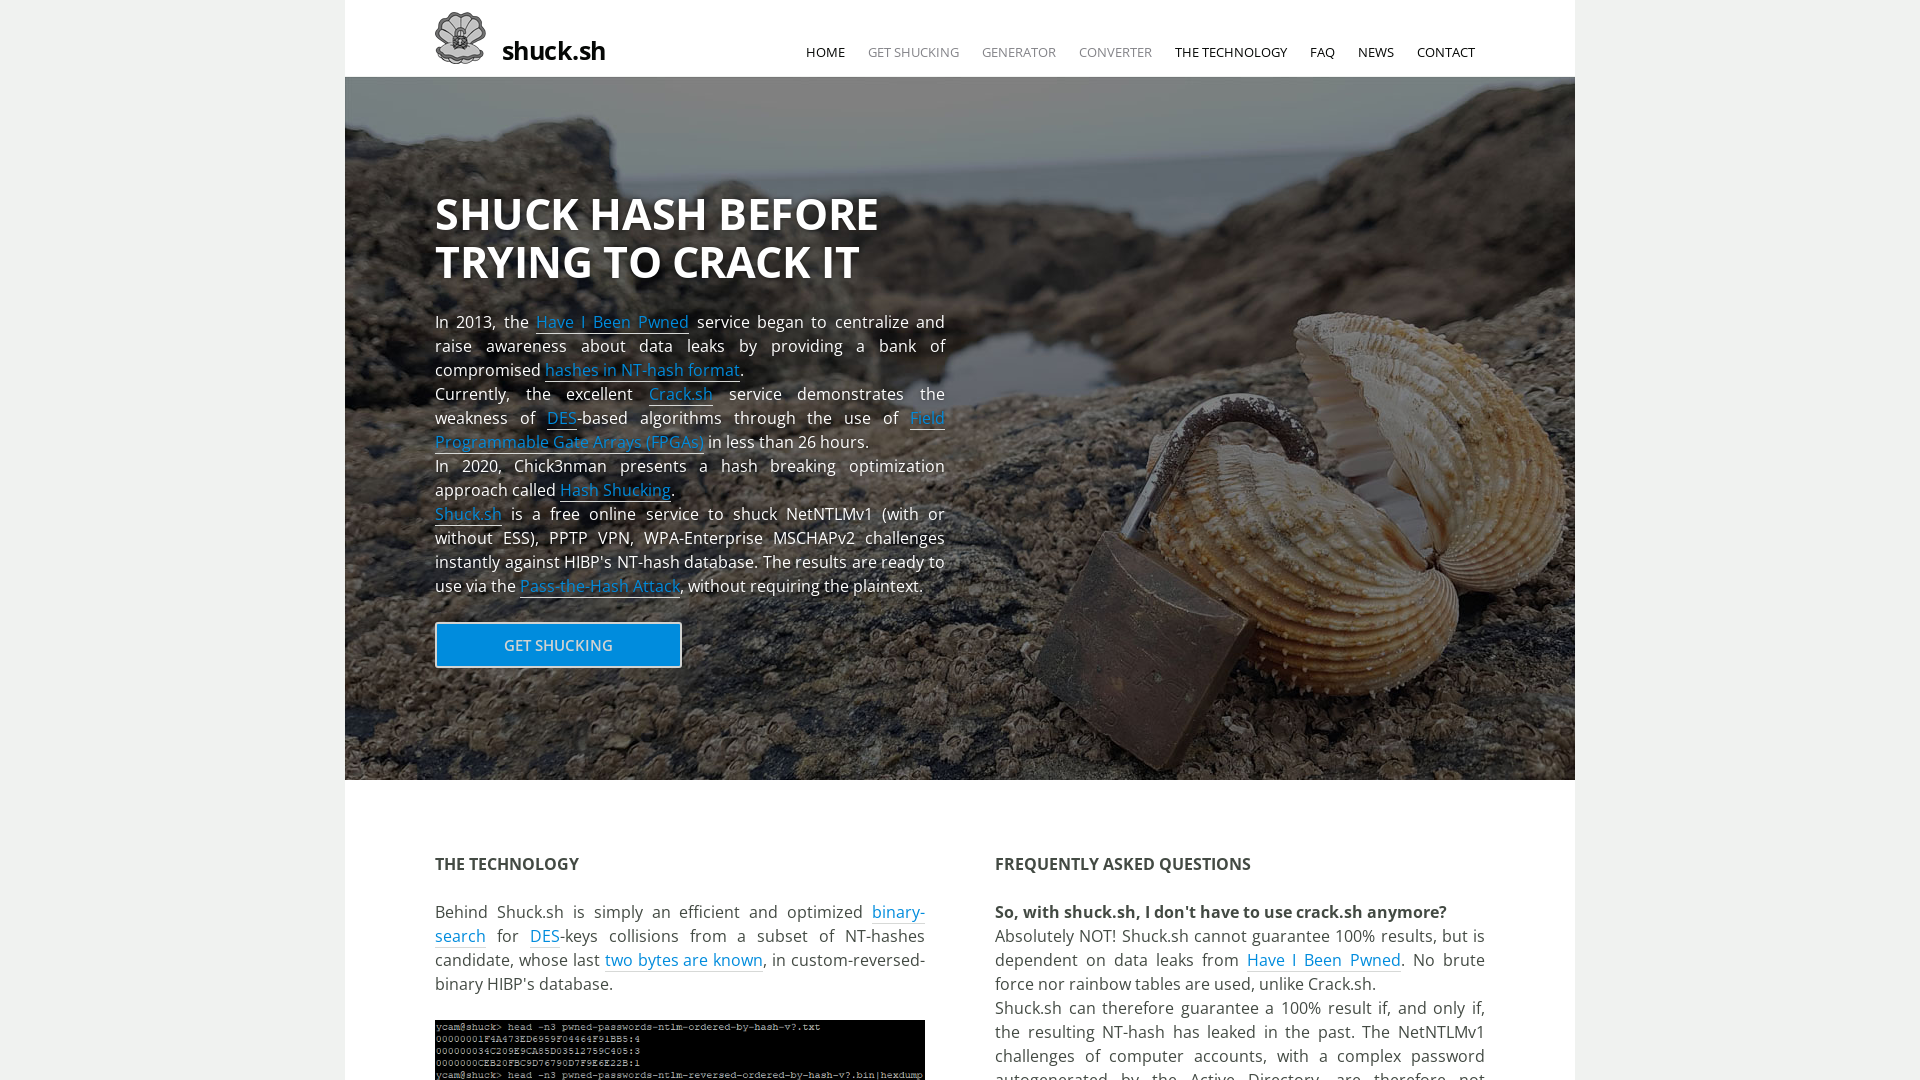 shuck.sh | Shuck hash before trying to crack it